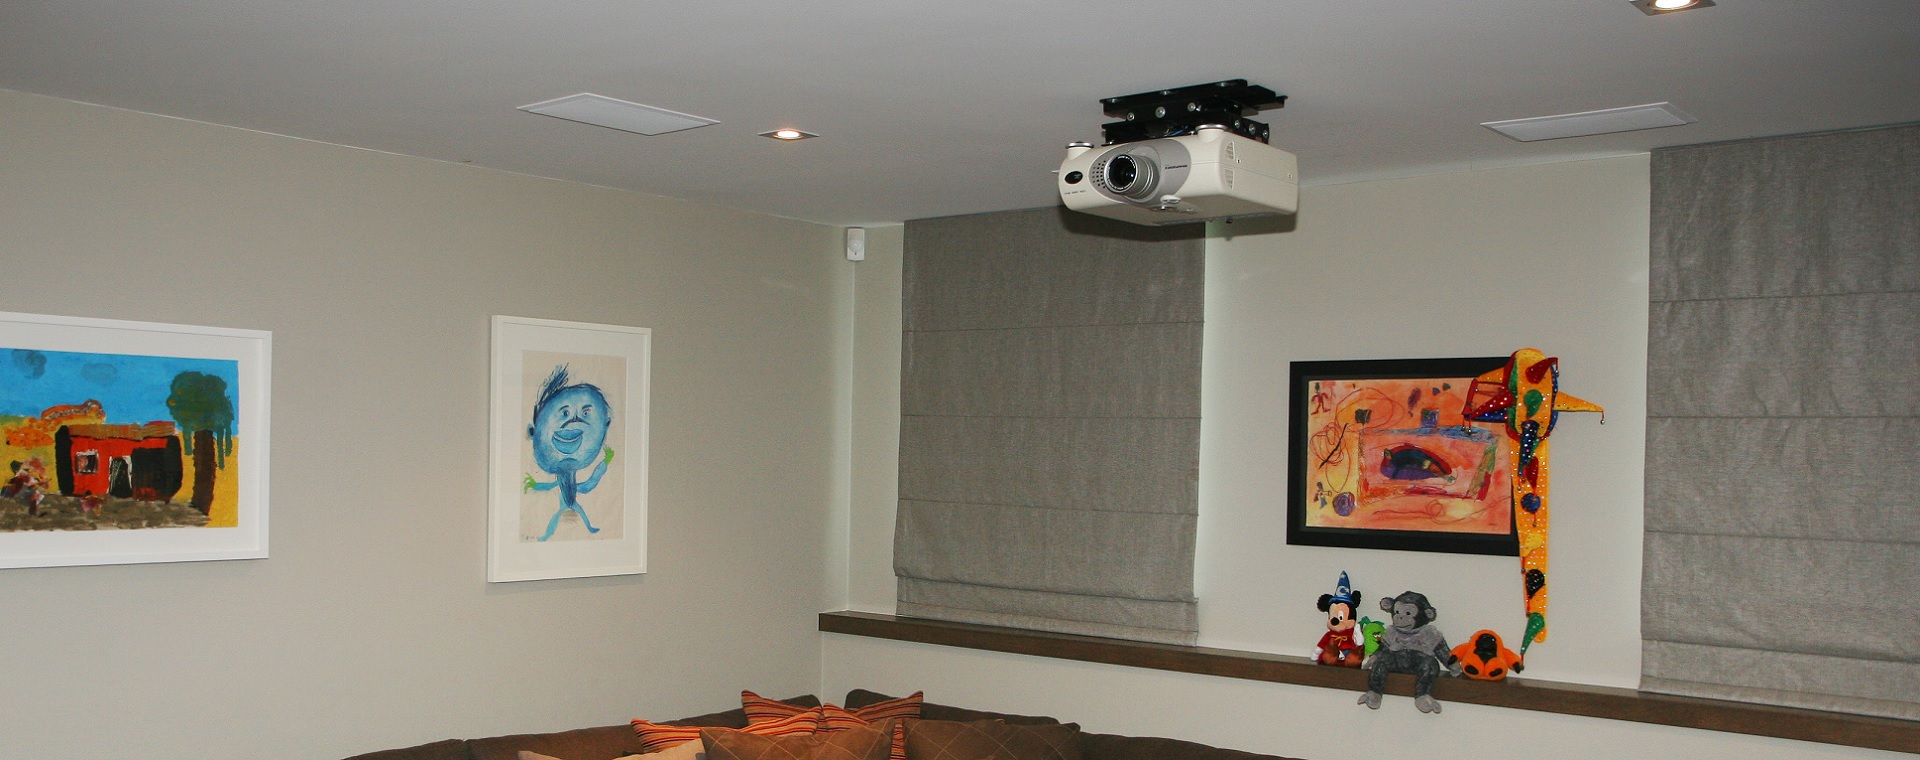 Home theatre room with ceiling-hung projector